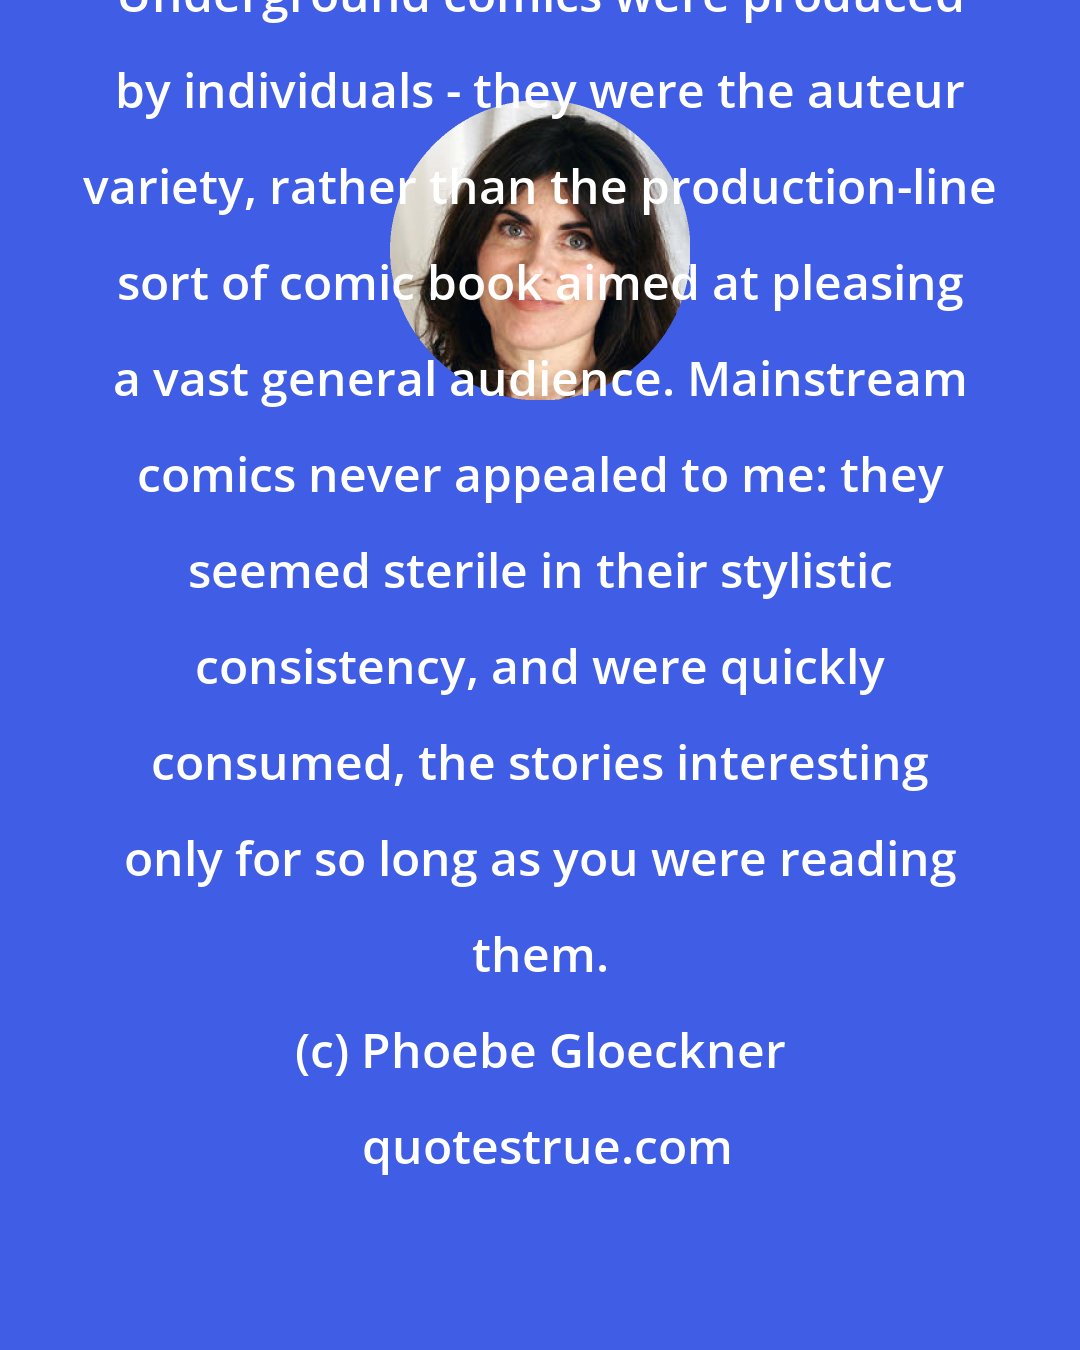 Phoebe Gloeckner: Underground comics were produced by individuals - they were the auteur variety, rather than the production-line sort of comic book aimed at pleasing a vast general audience. Mainstream comics never appealed to me: they seemed sterile in their stylistic consistency, and were quickly consumed, the stories interesting only for so long as you were reading them.